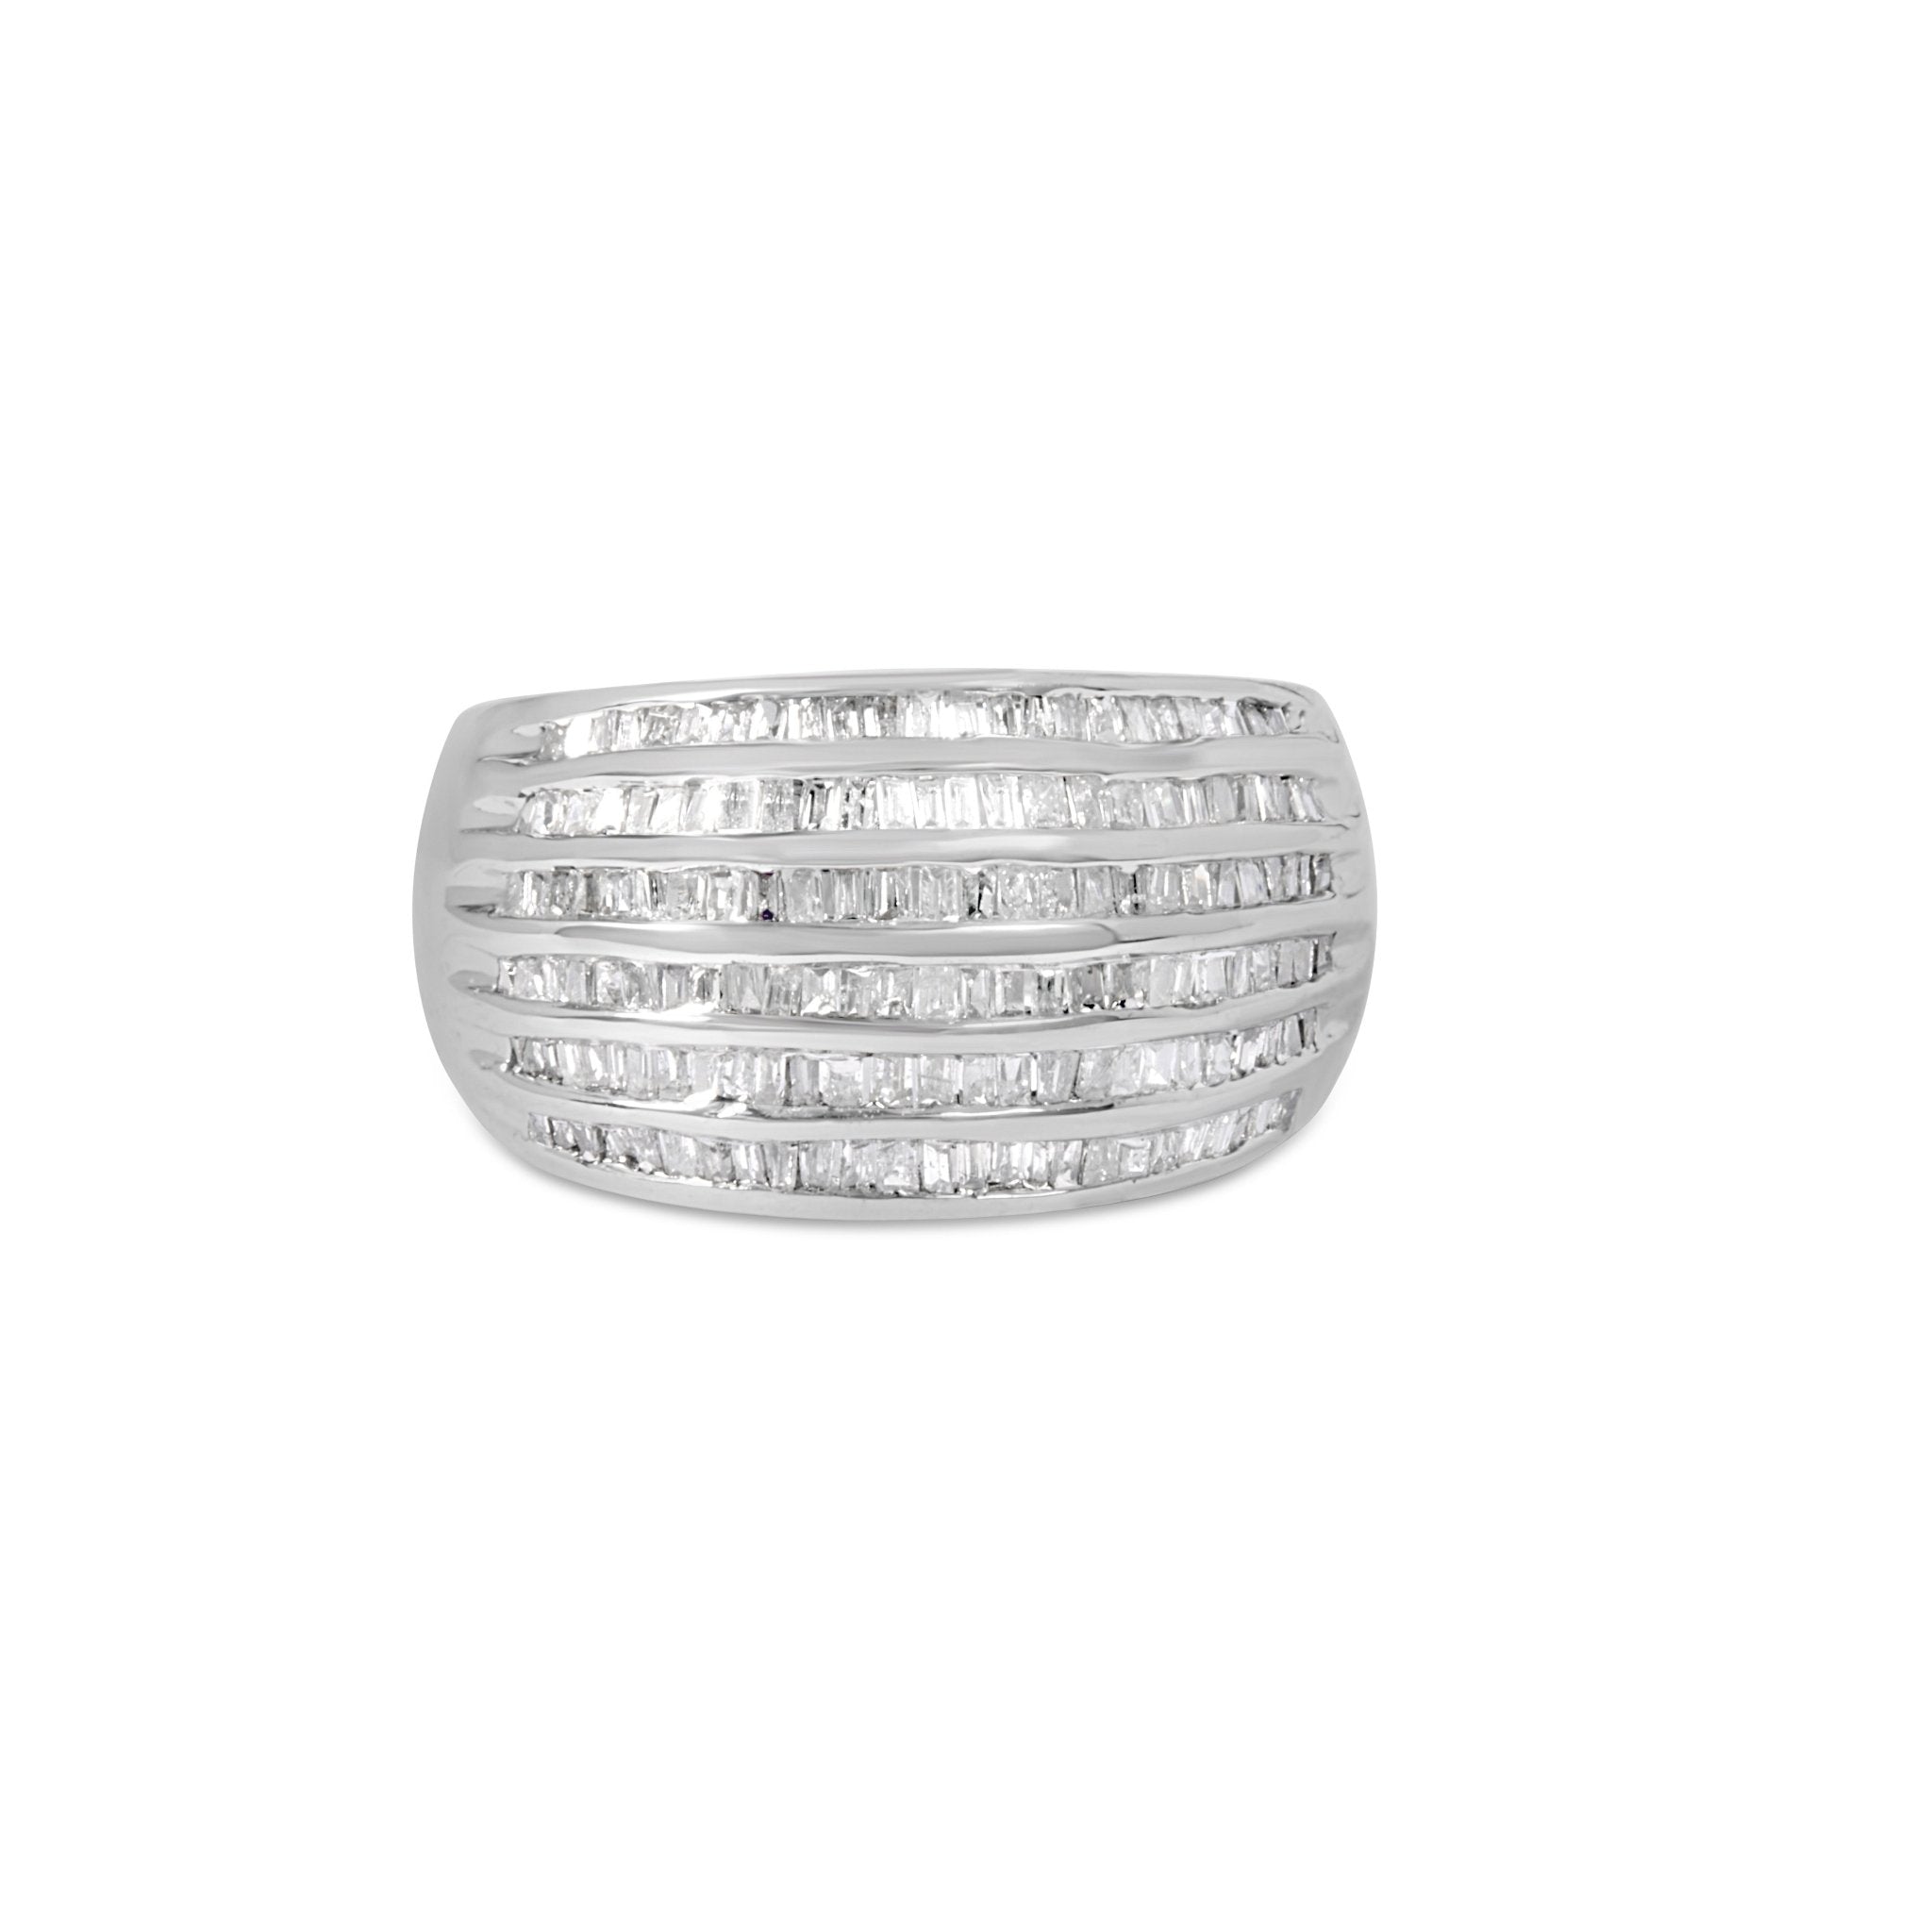 .925-Sterling-Silver-1.0-Cttw-Baguette-Cut-Diamond-6-Row-Channel-Set-Domed-Tapered-Cocktail-Fashion-Ring-(H-I-Color,-I2-I3-Clarity)-Size-7-3/4-Rings